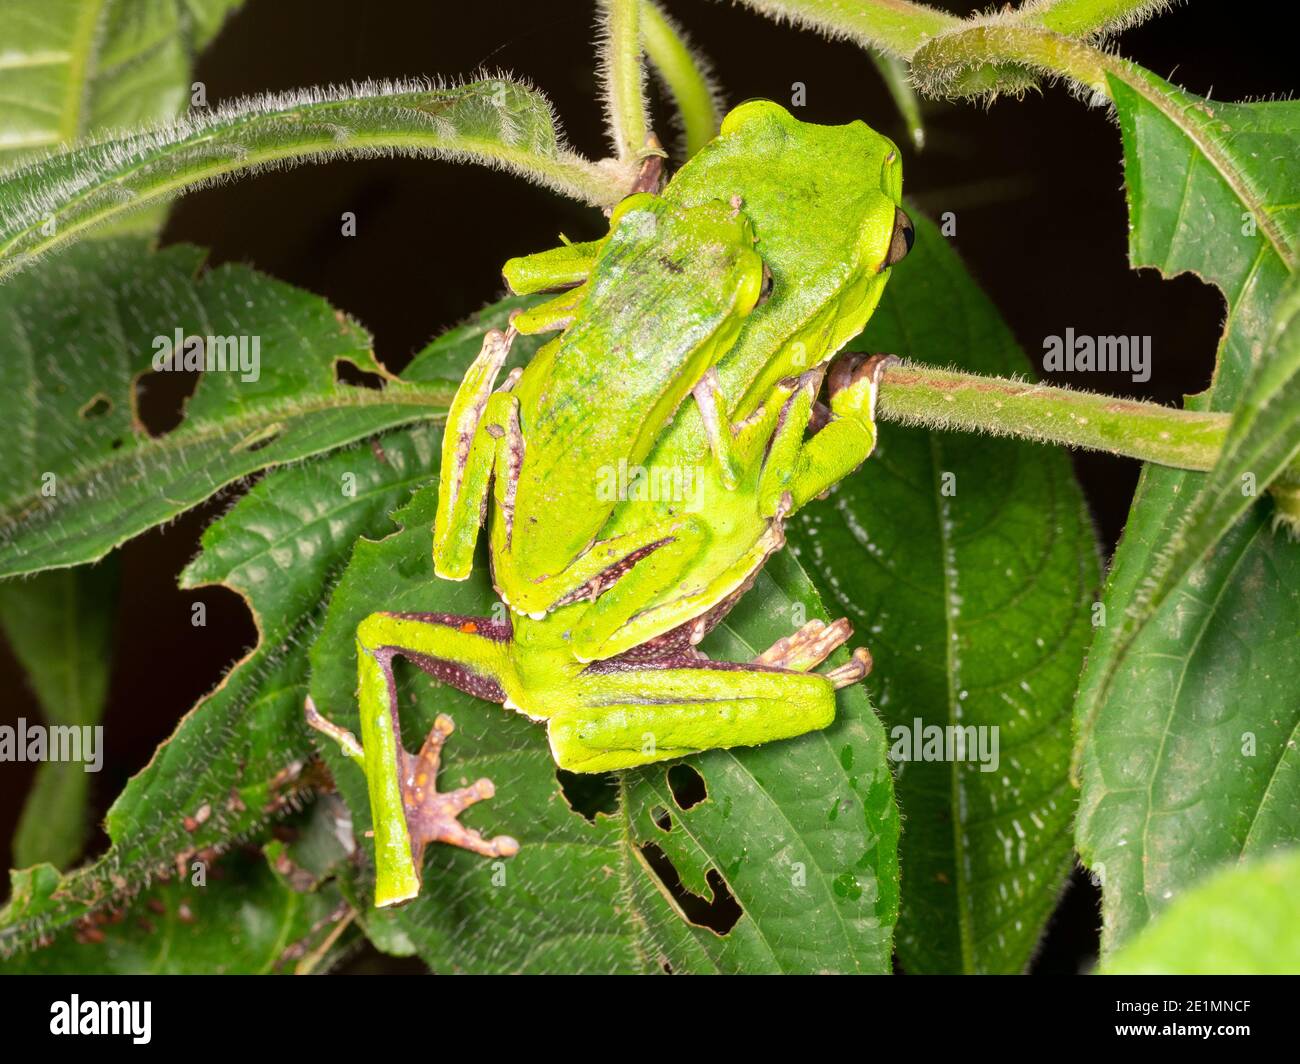 Pair of White-lined monkey frog (Phylomedusa vaillantii) in amplexus prior to depositing their eggs in a leaf nest, Ecuador. Stock Photo